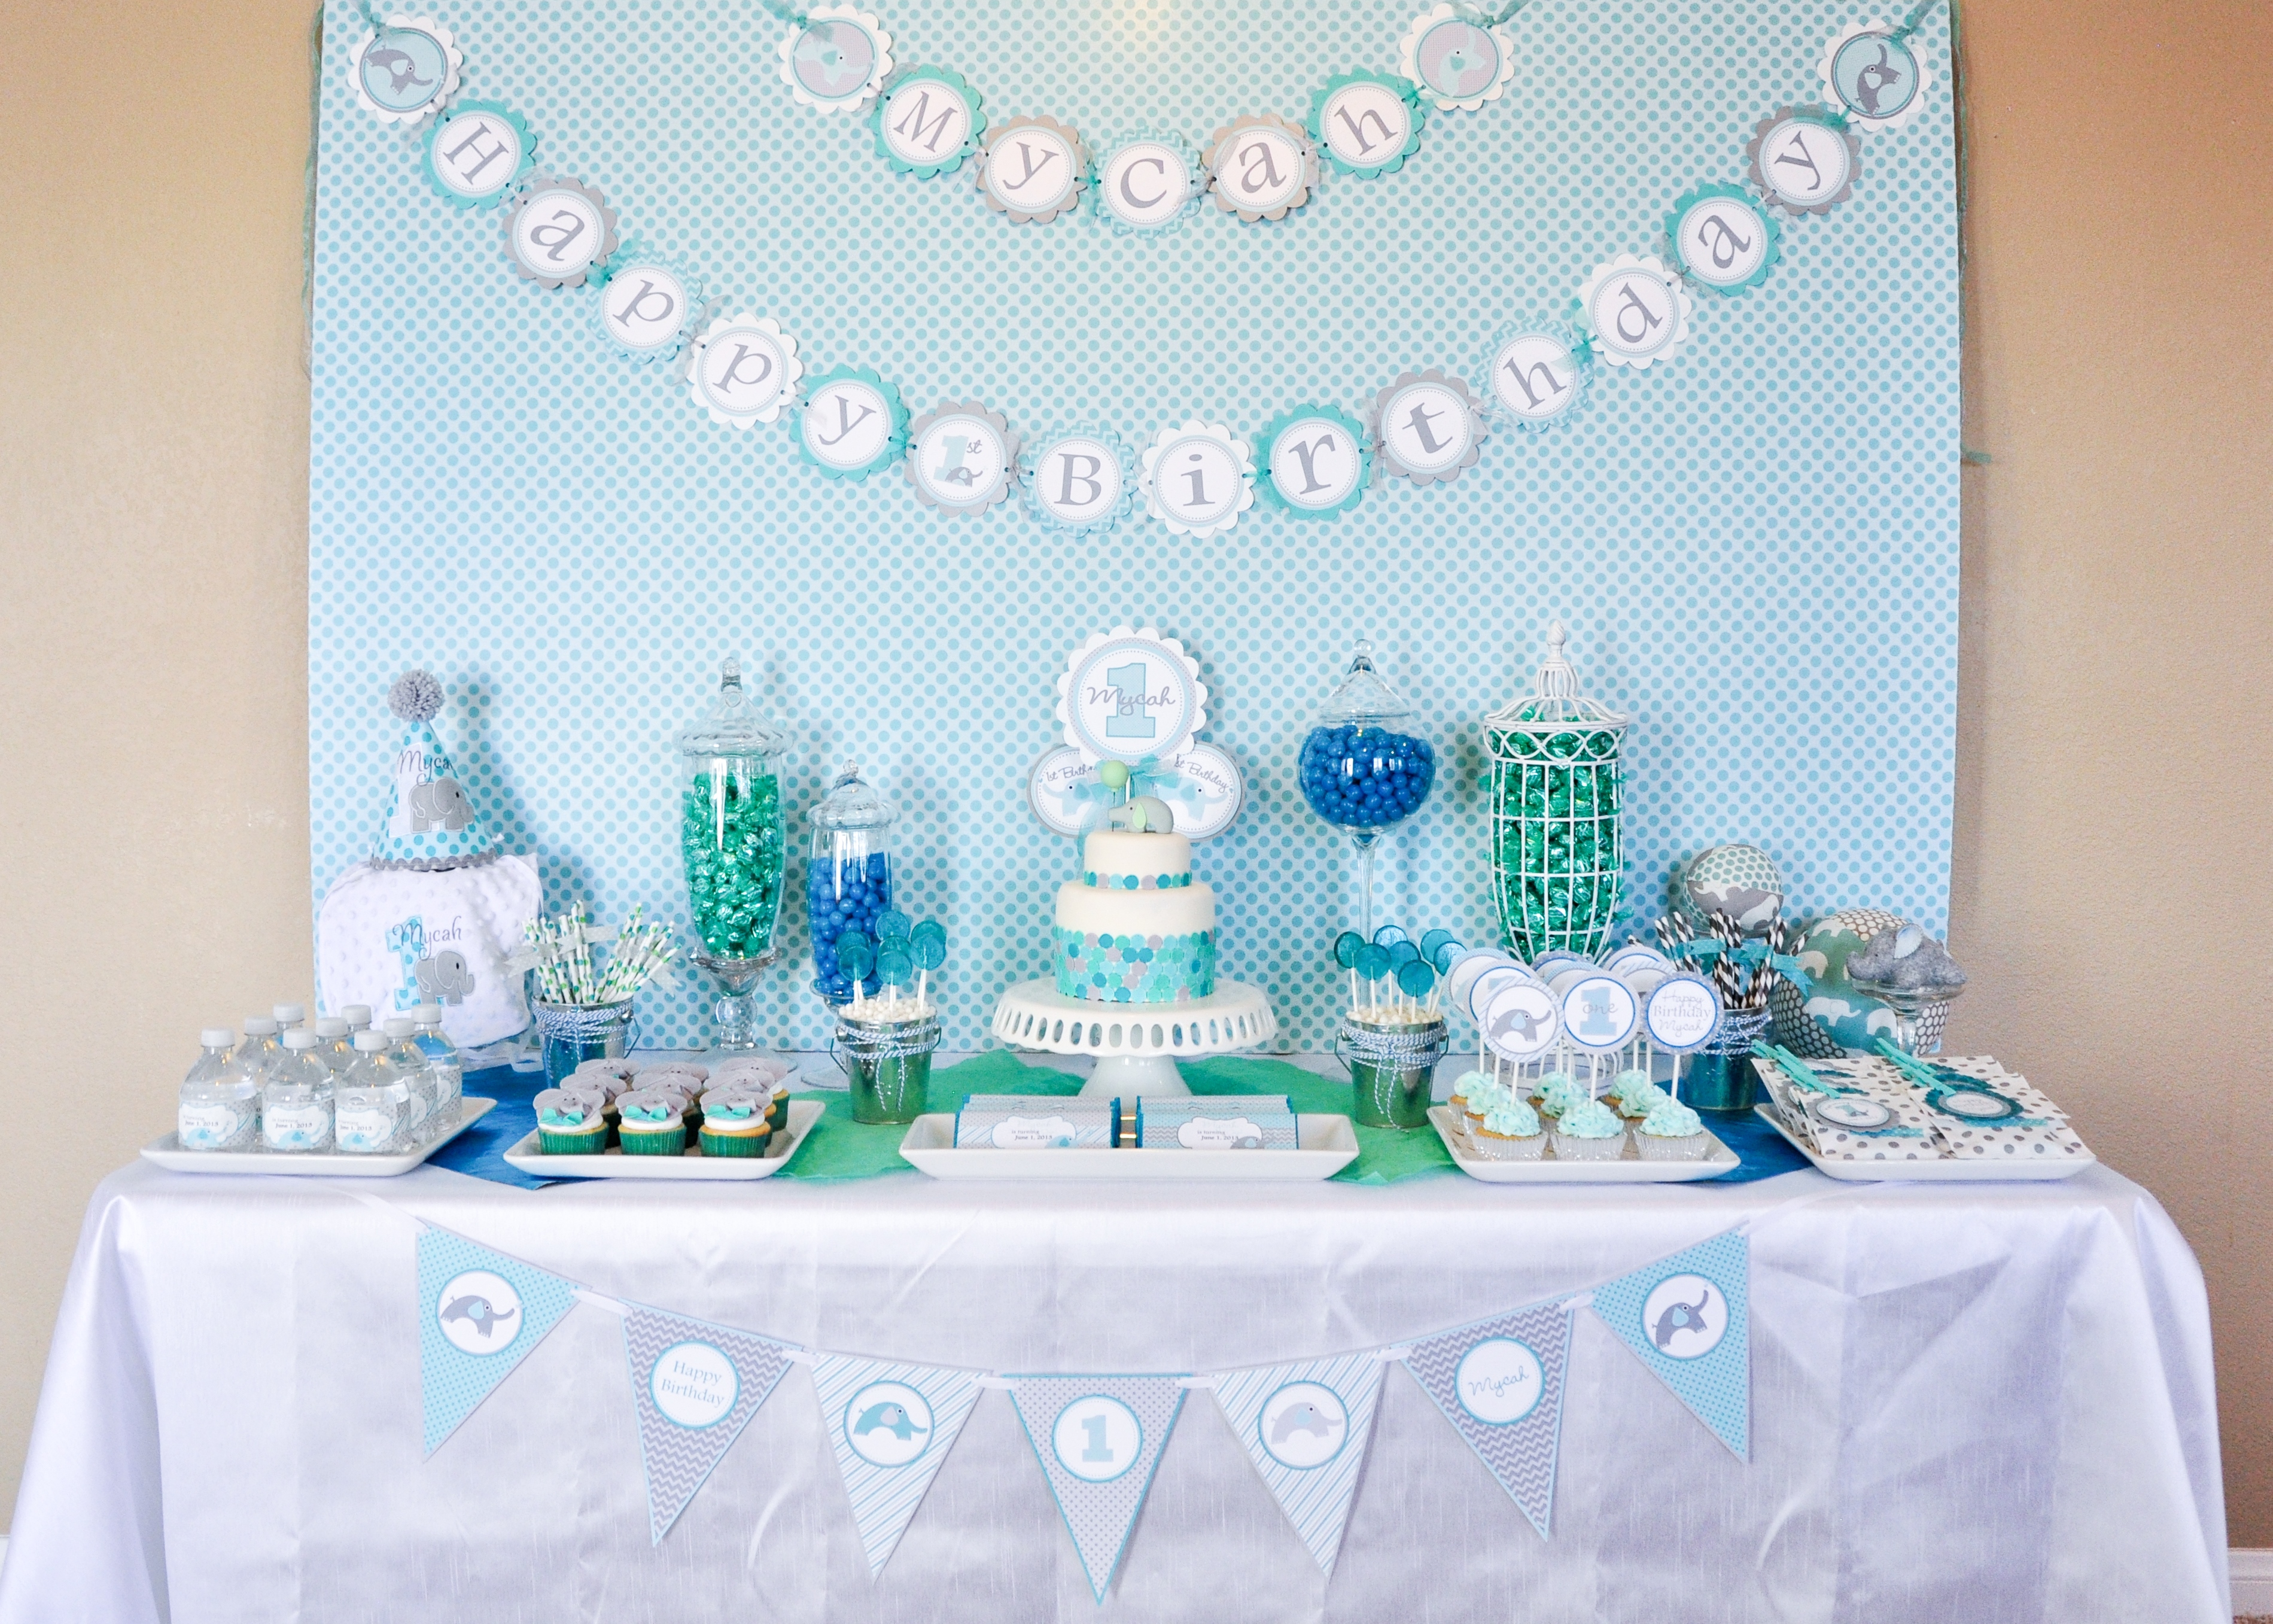 Full Size of Baby Shower:89+ Indulging Baby Shower Banner Picture Inspirations 5 Great Ideas For Elephant Baby Shower Decorations Blogbeen Excellent Elephant Baby Shower Decorations Lovely Sorepointrecords Ljcbczp